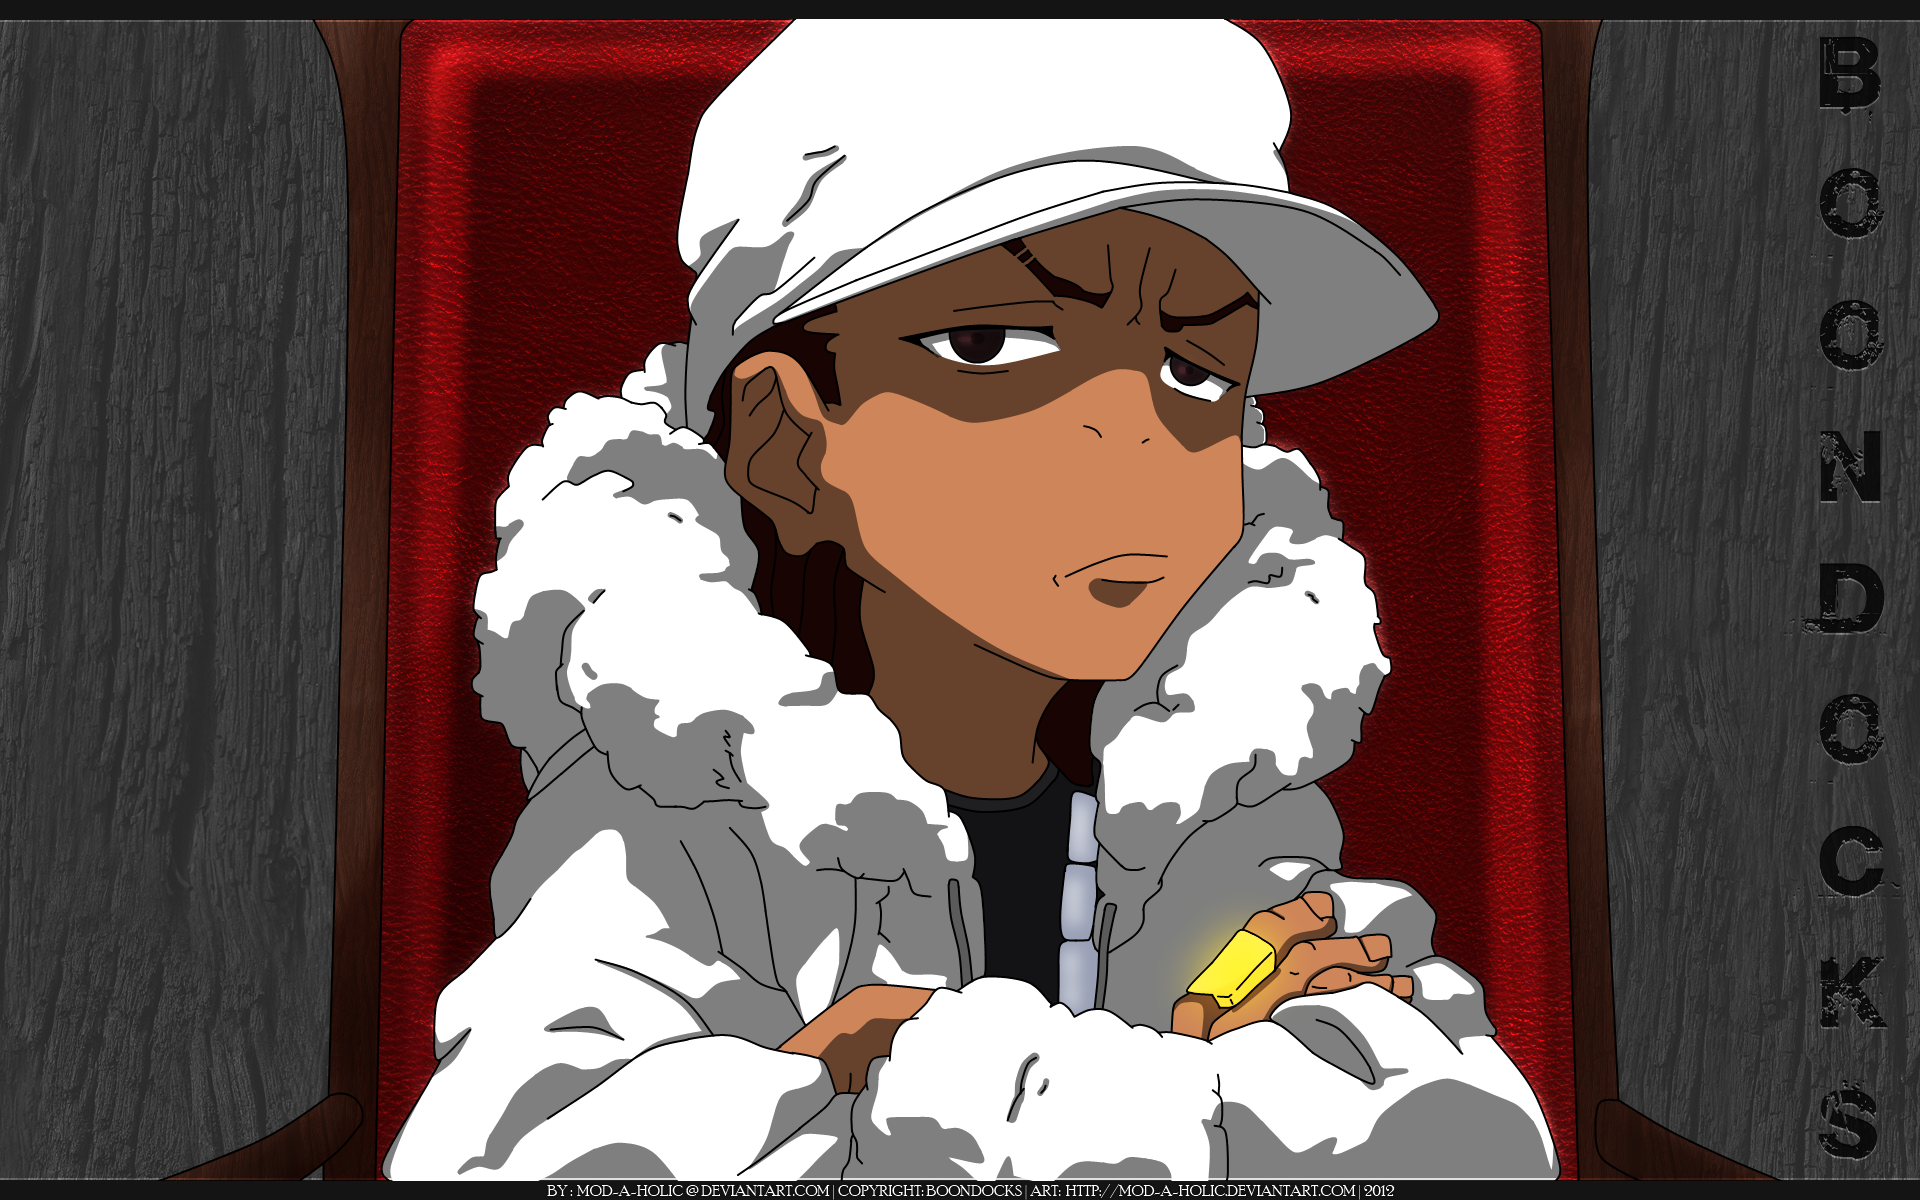 Gallery For Gt Boondocks Wallpaper Android